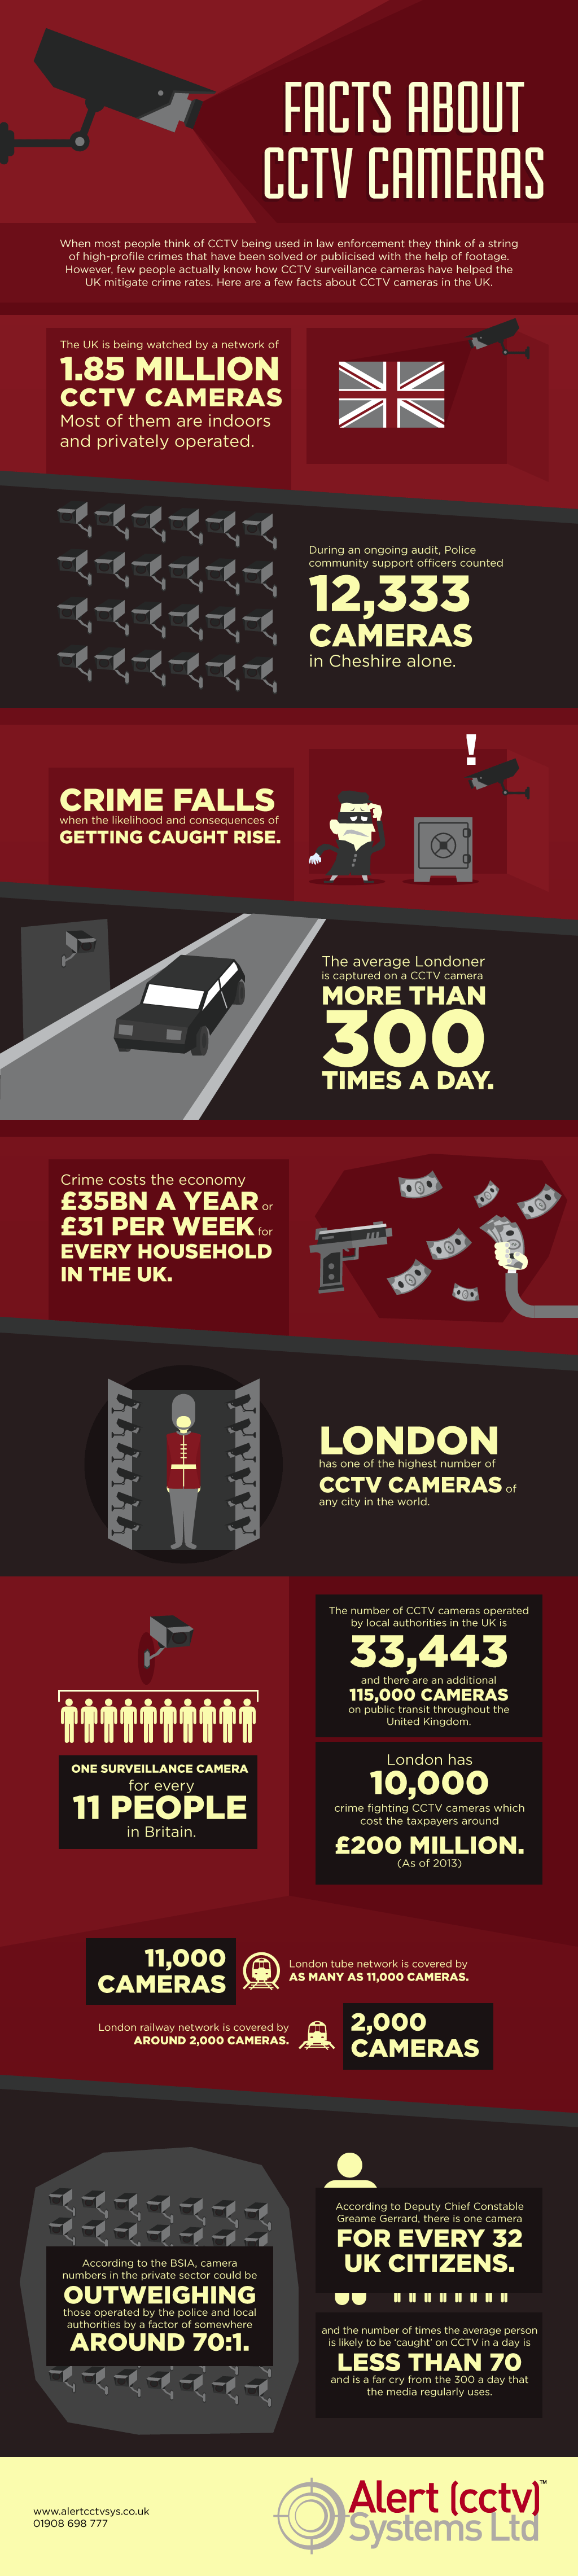 14 Facts About CCTV Surveillance In The UK